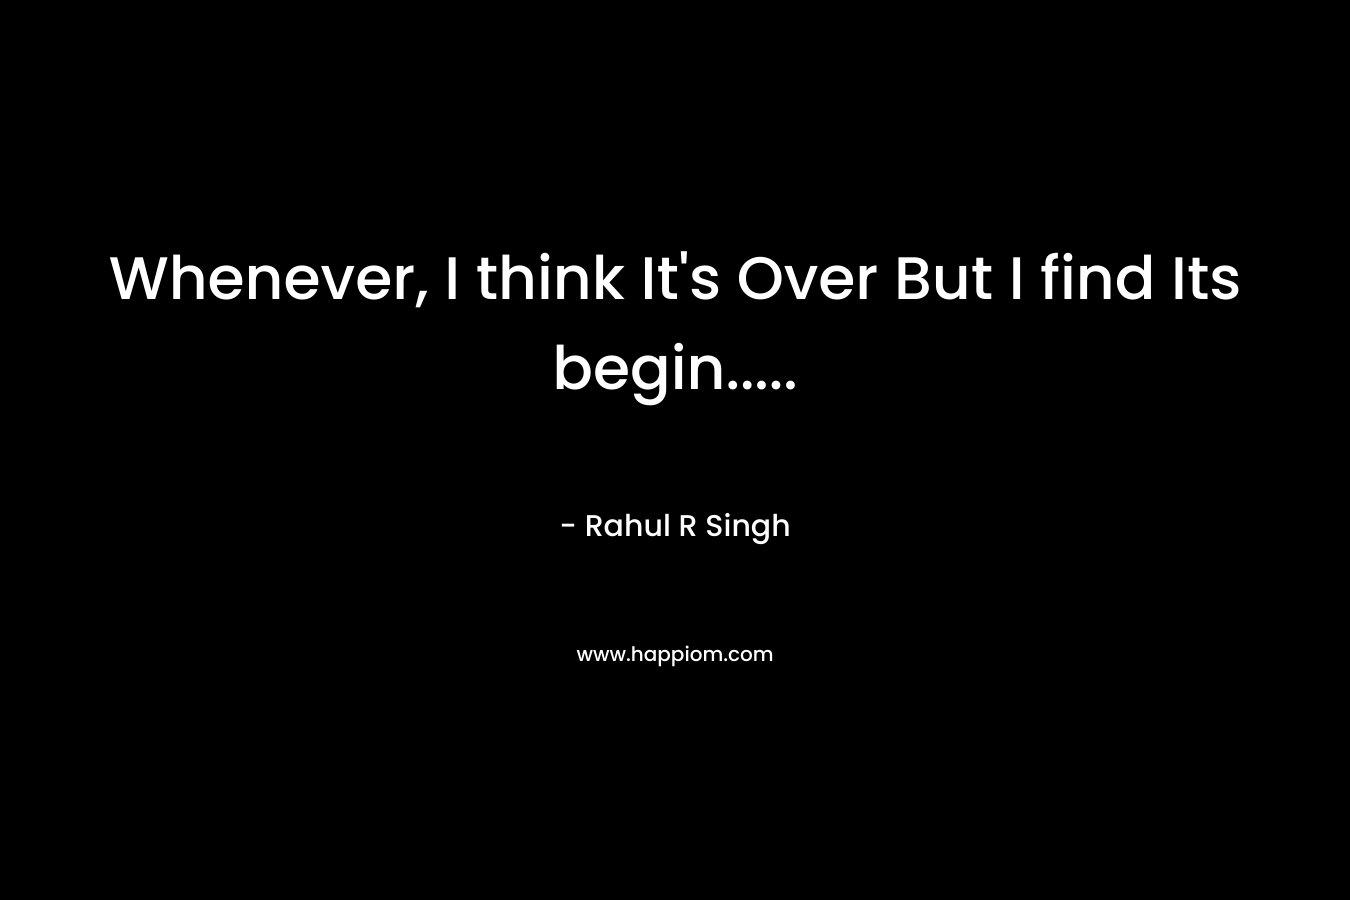 Whenever, I think It's Over But I find Its begin.....